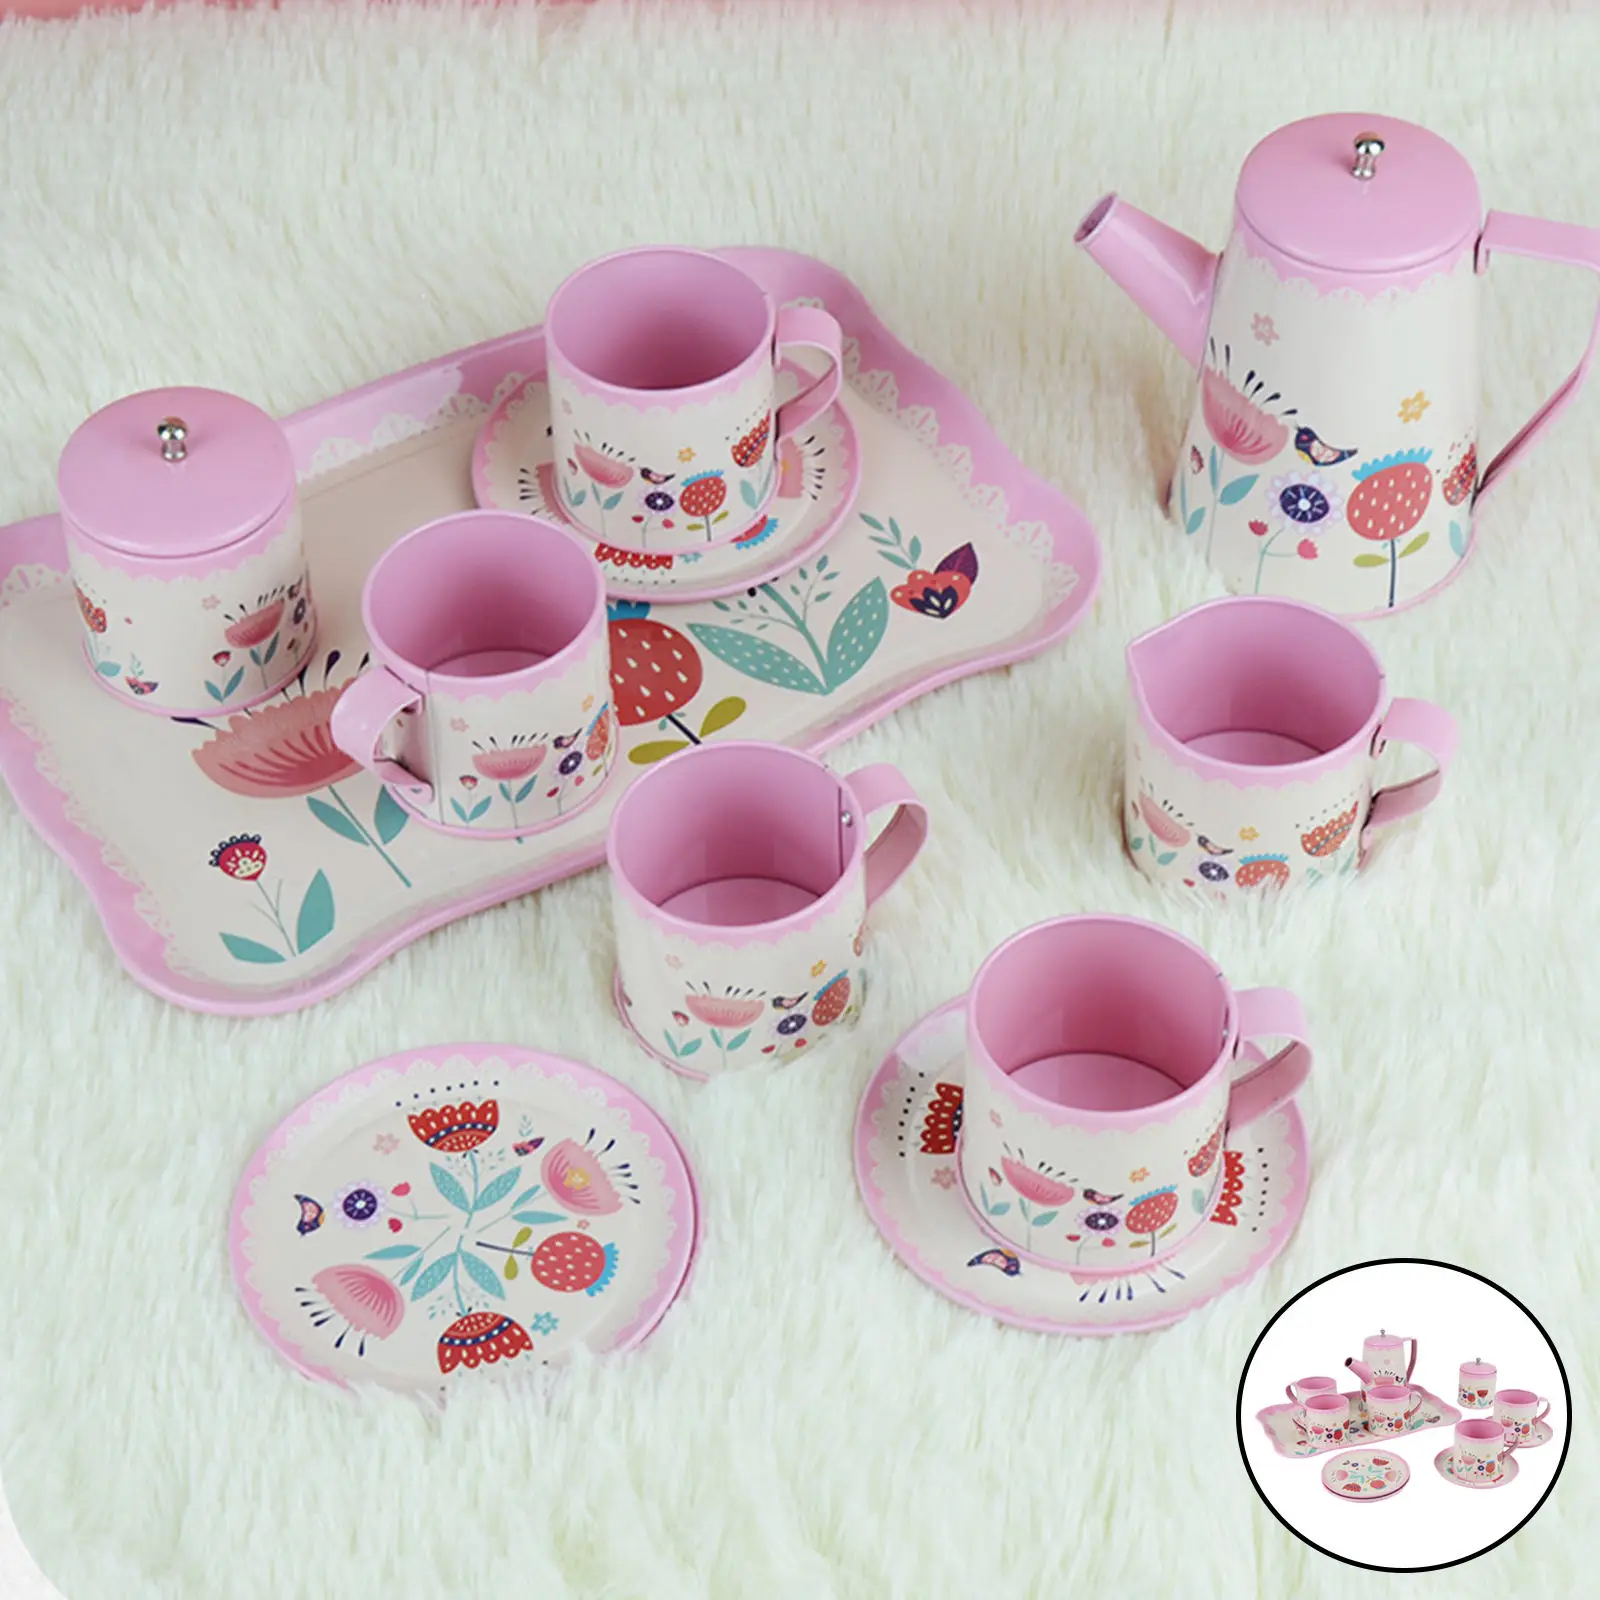 12x Kids Tin Tea Set Kitchen Toys Pretend Play Metal Role Play Simulation Teapot Teacup for Children Girls Holiday Gifts